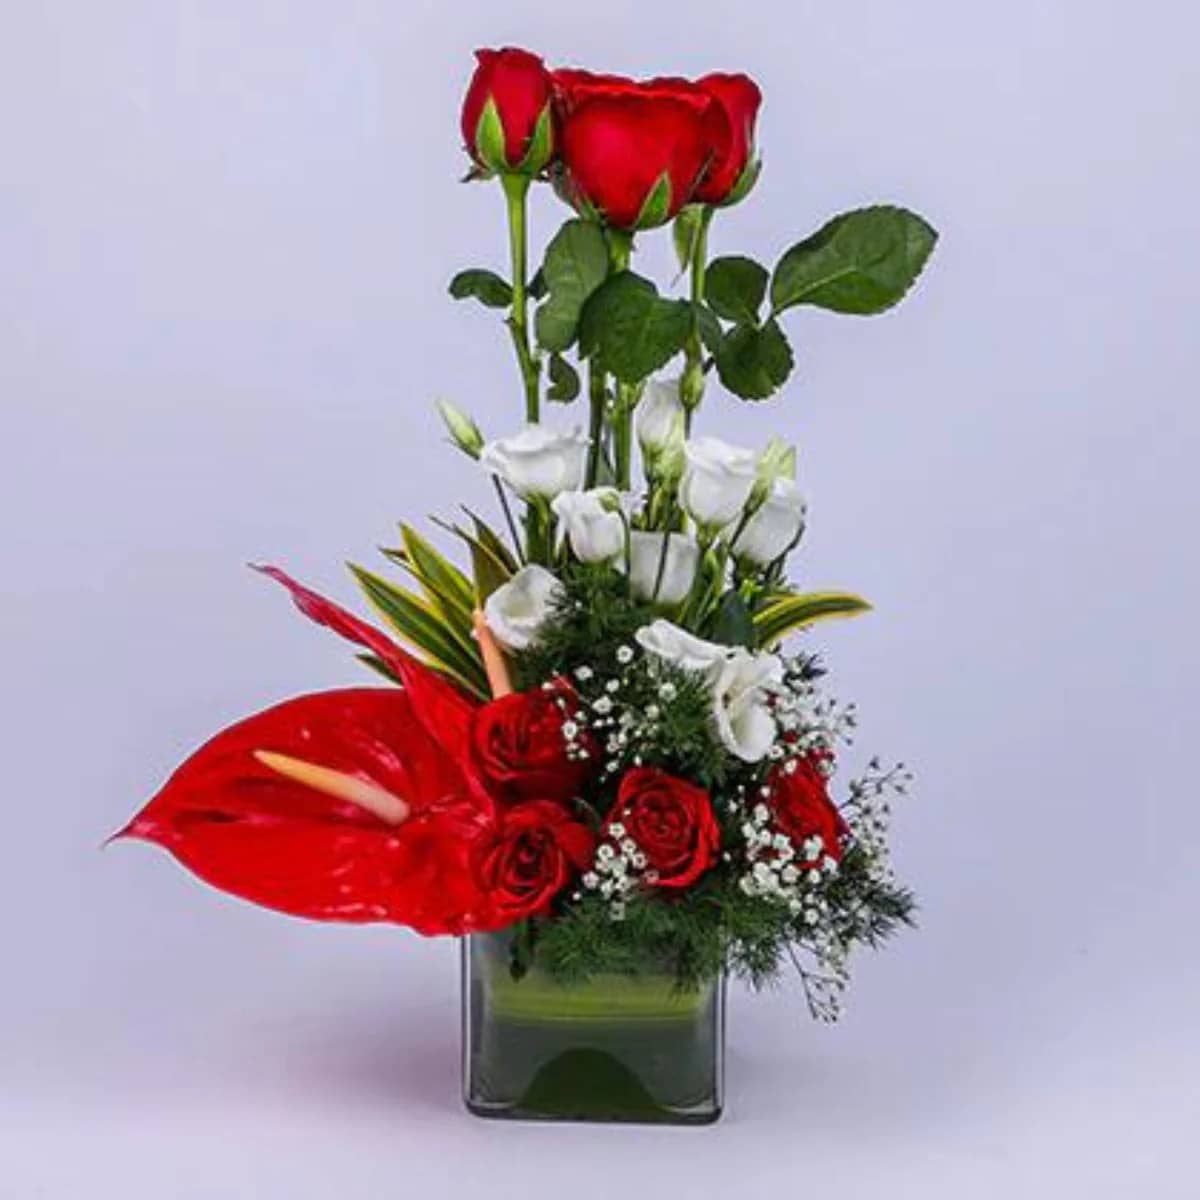 Ravishing Red Roses and Anthurium Vase - Perfect Red Roses Bouquet for Every Occasion